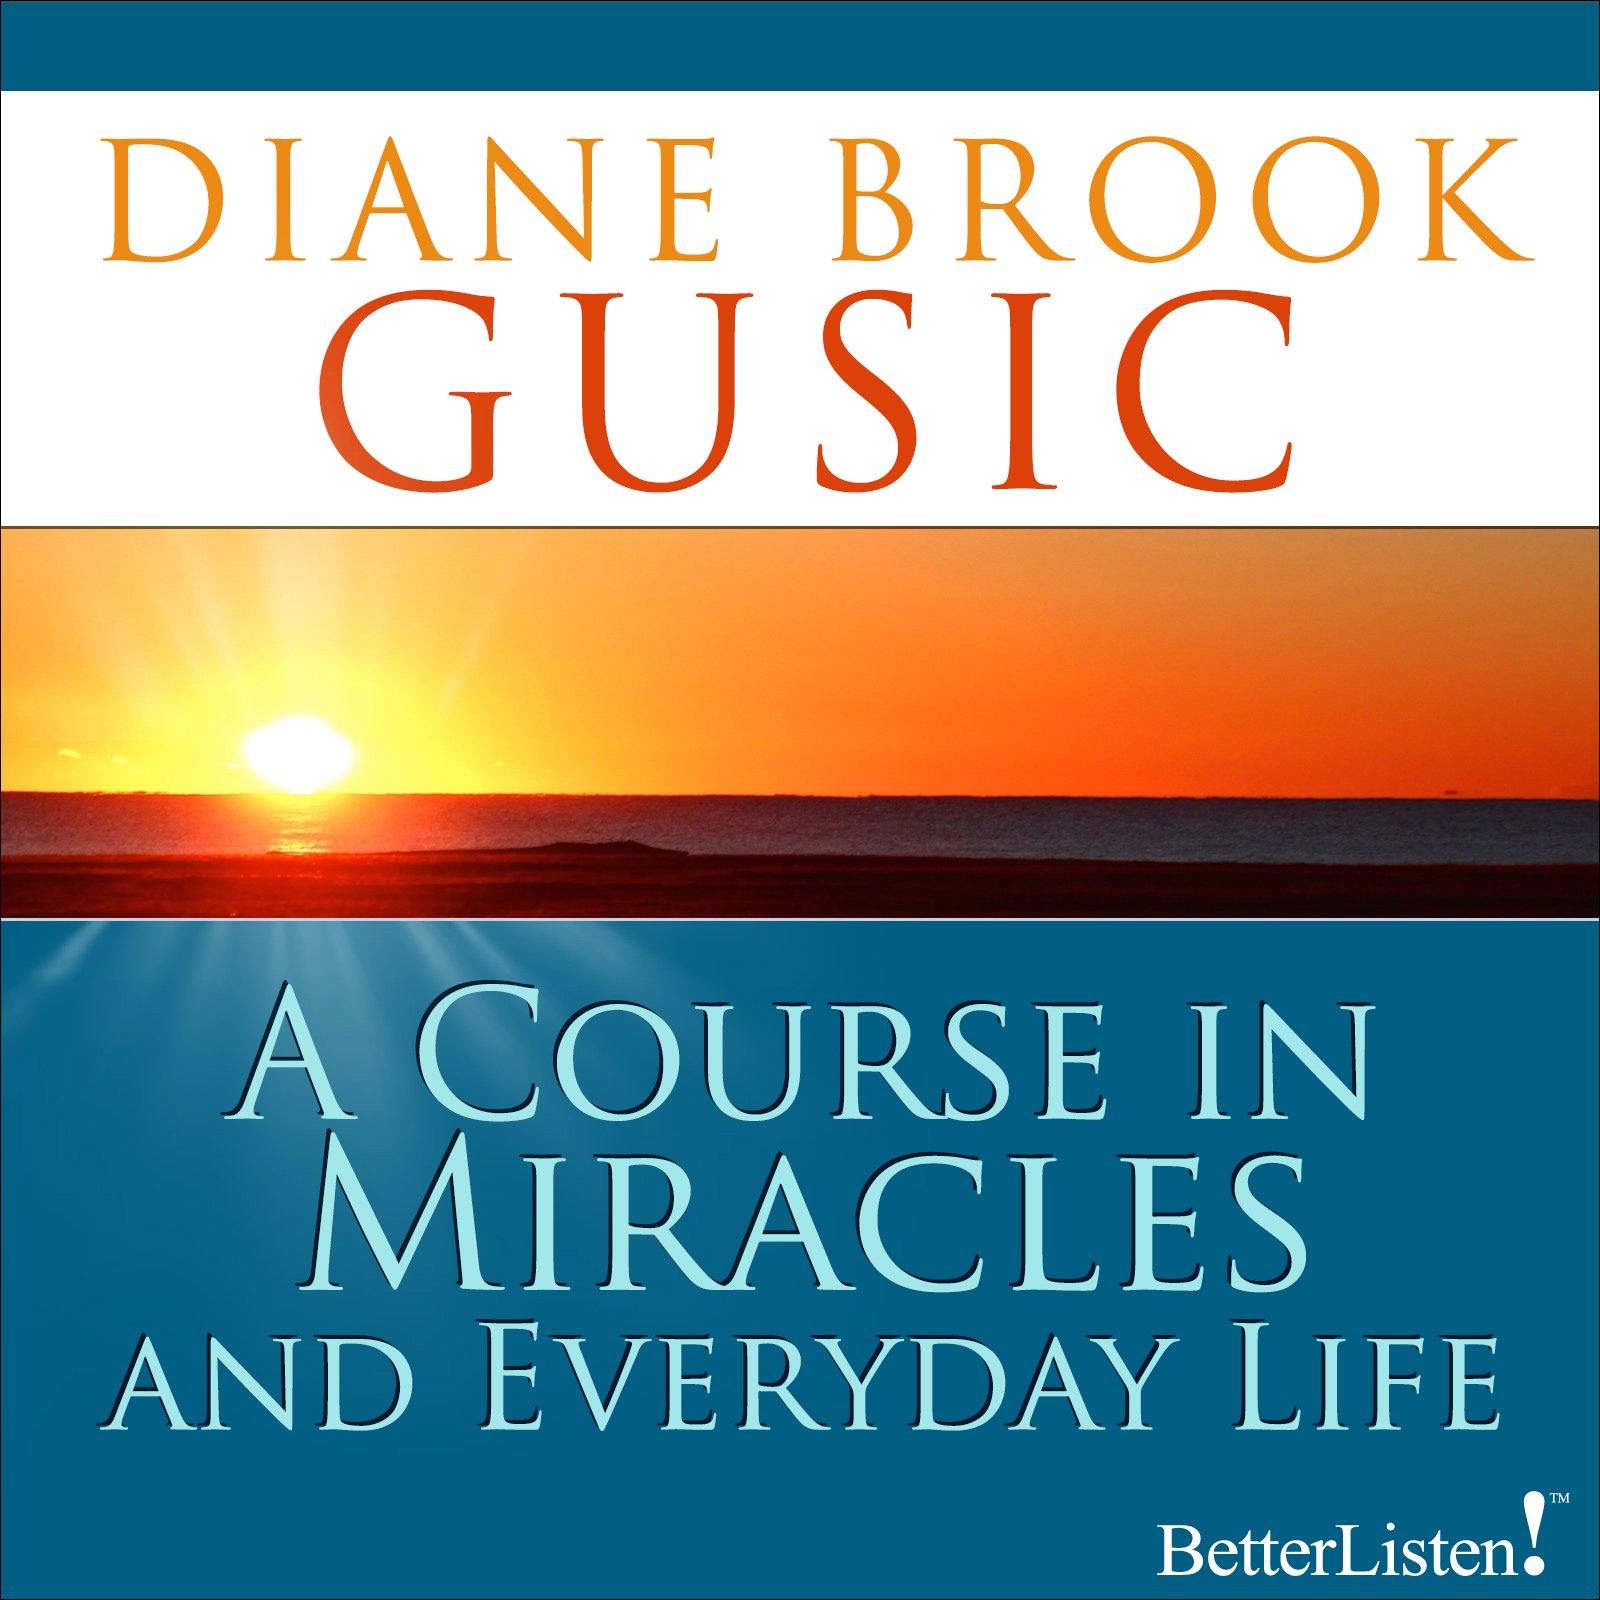 A Course in Miracles and Everyday Life Diane Brook Gusic Audio Program BetterListen! - BetterListen!